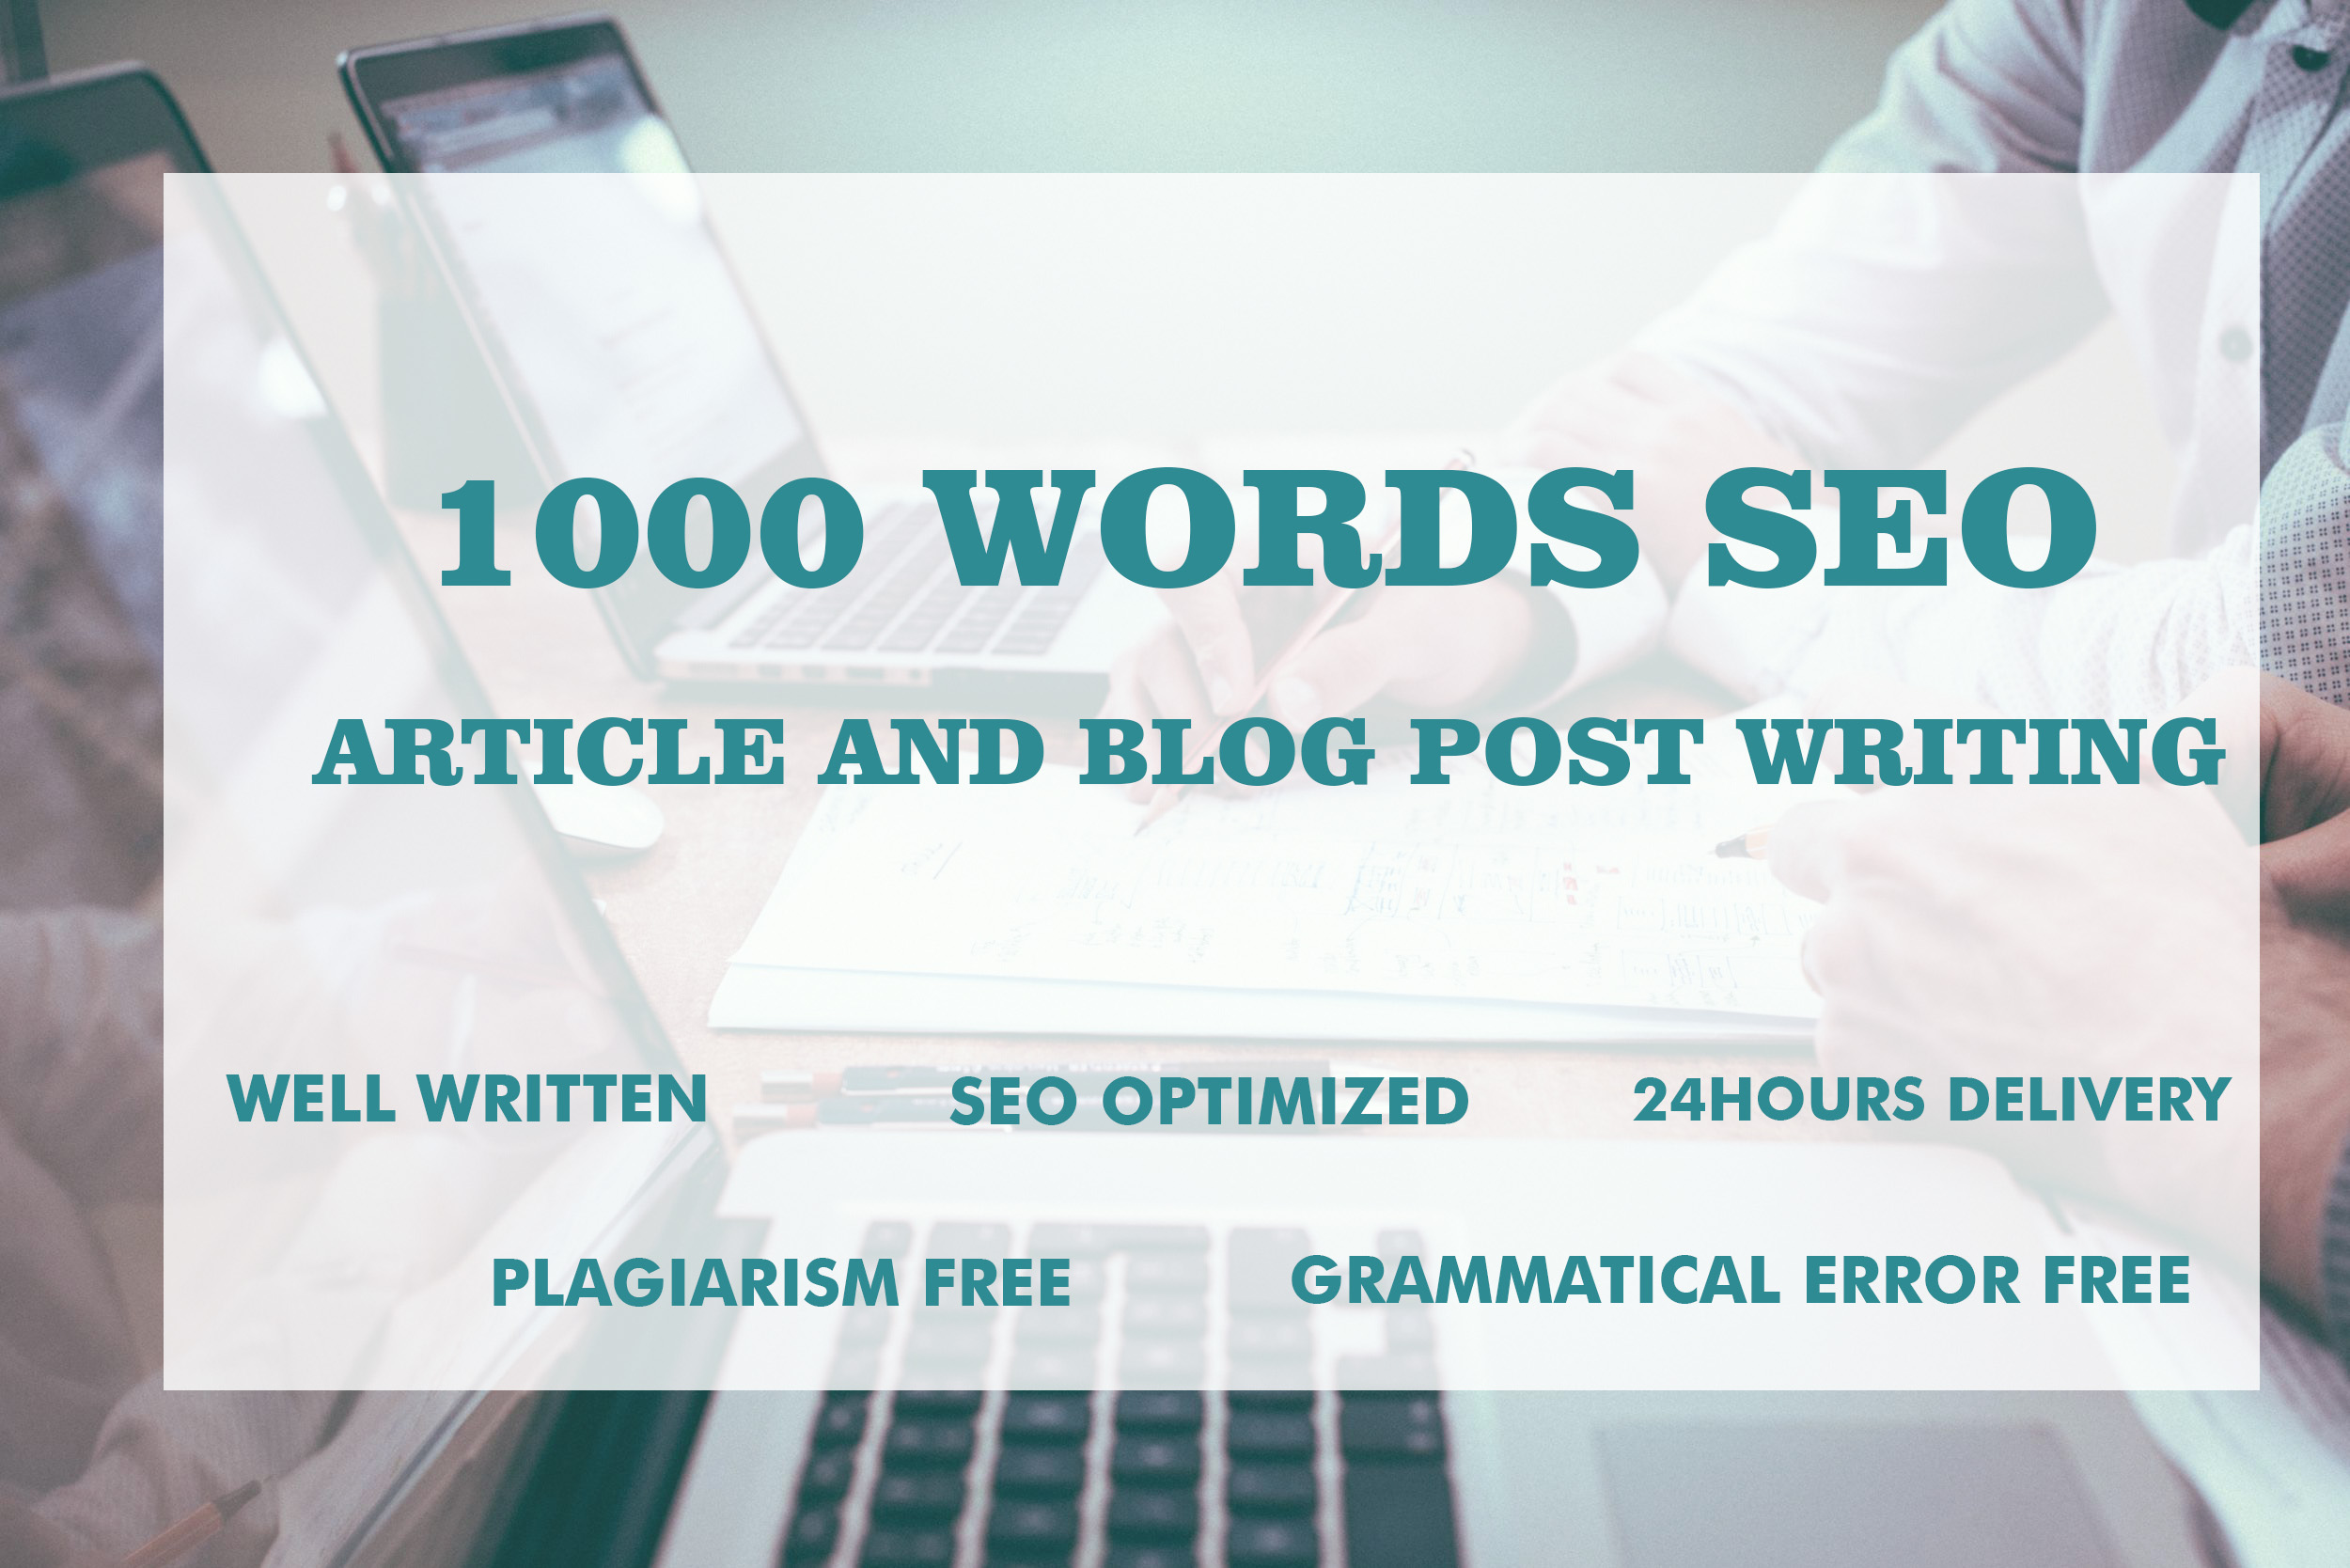 I will be your 1000 words SEO blog post writer, article writer, and content writer